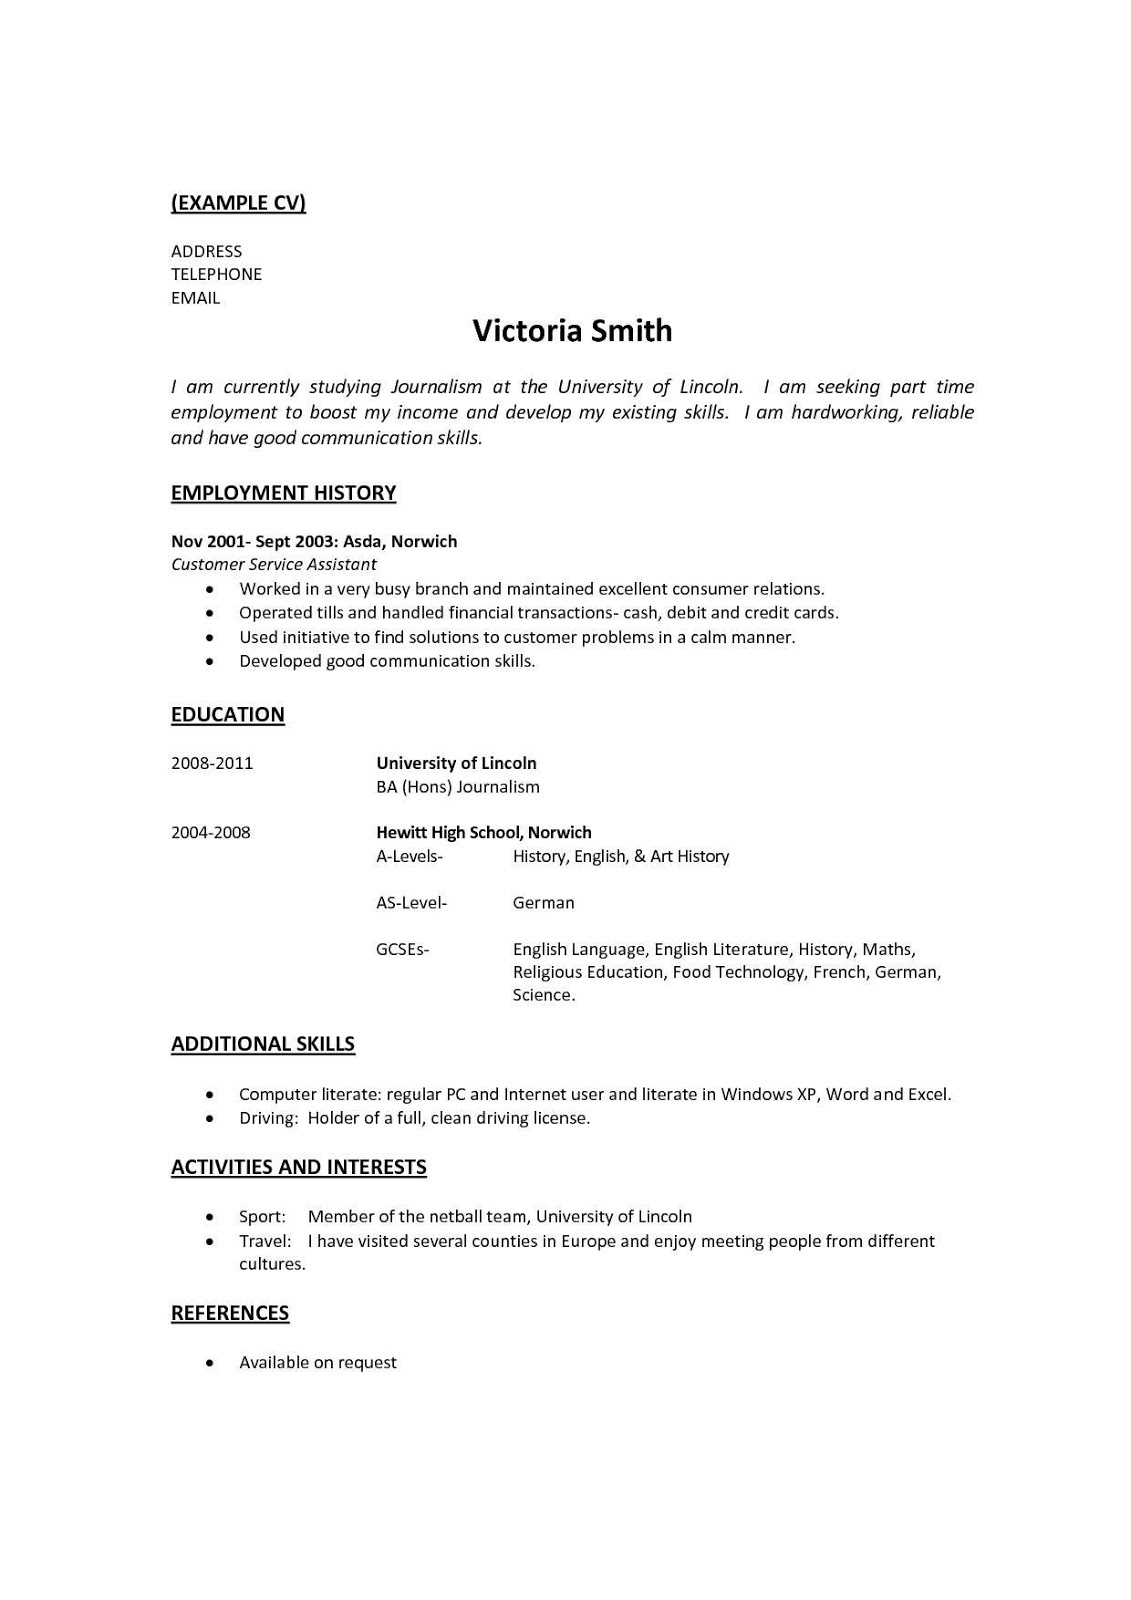 free-resume-template-for-internship-student-with-no-experience